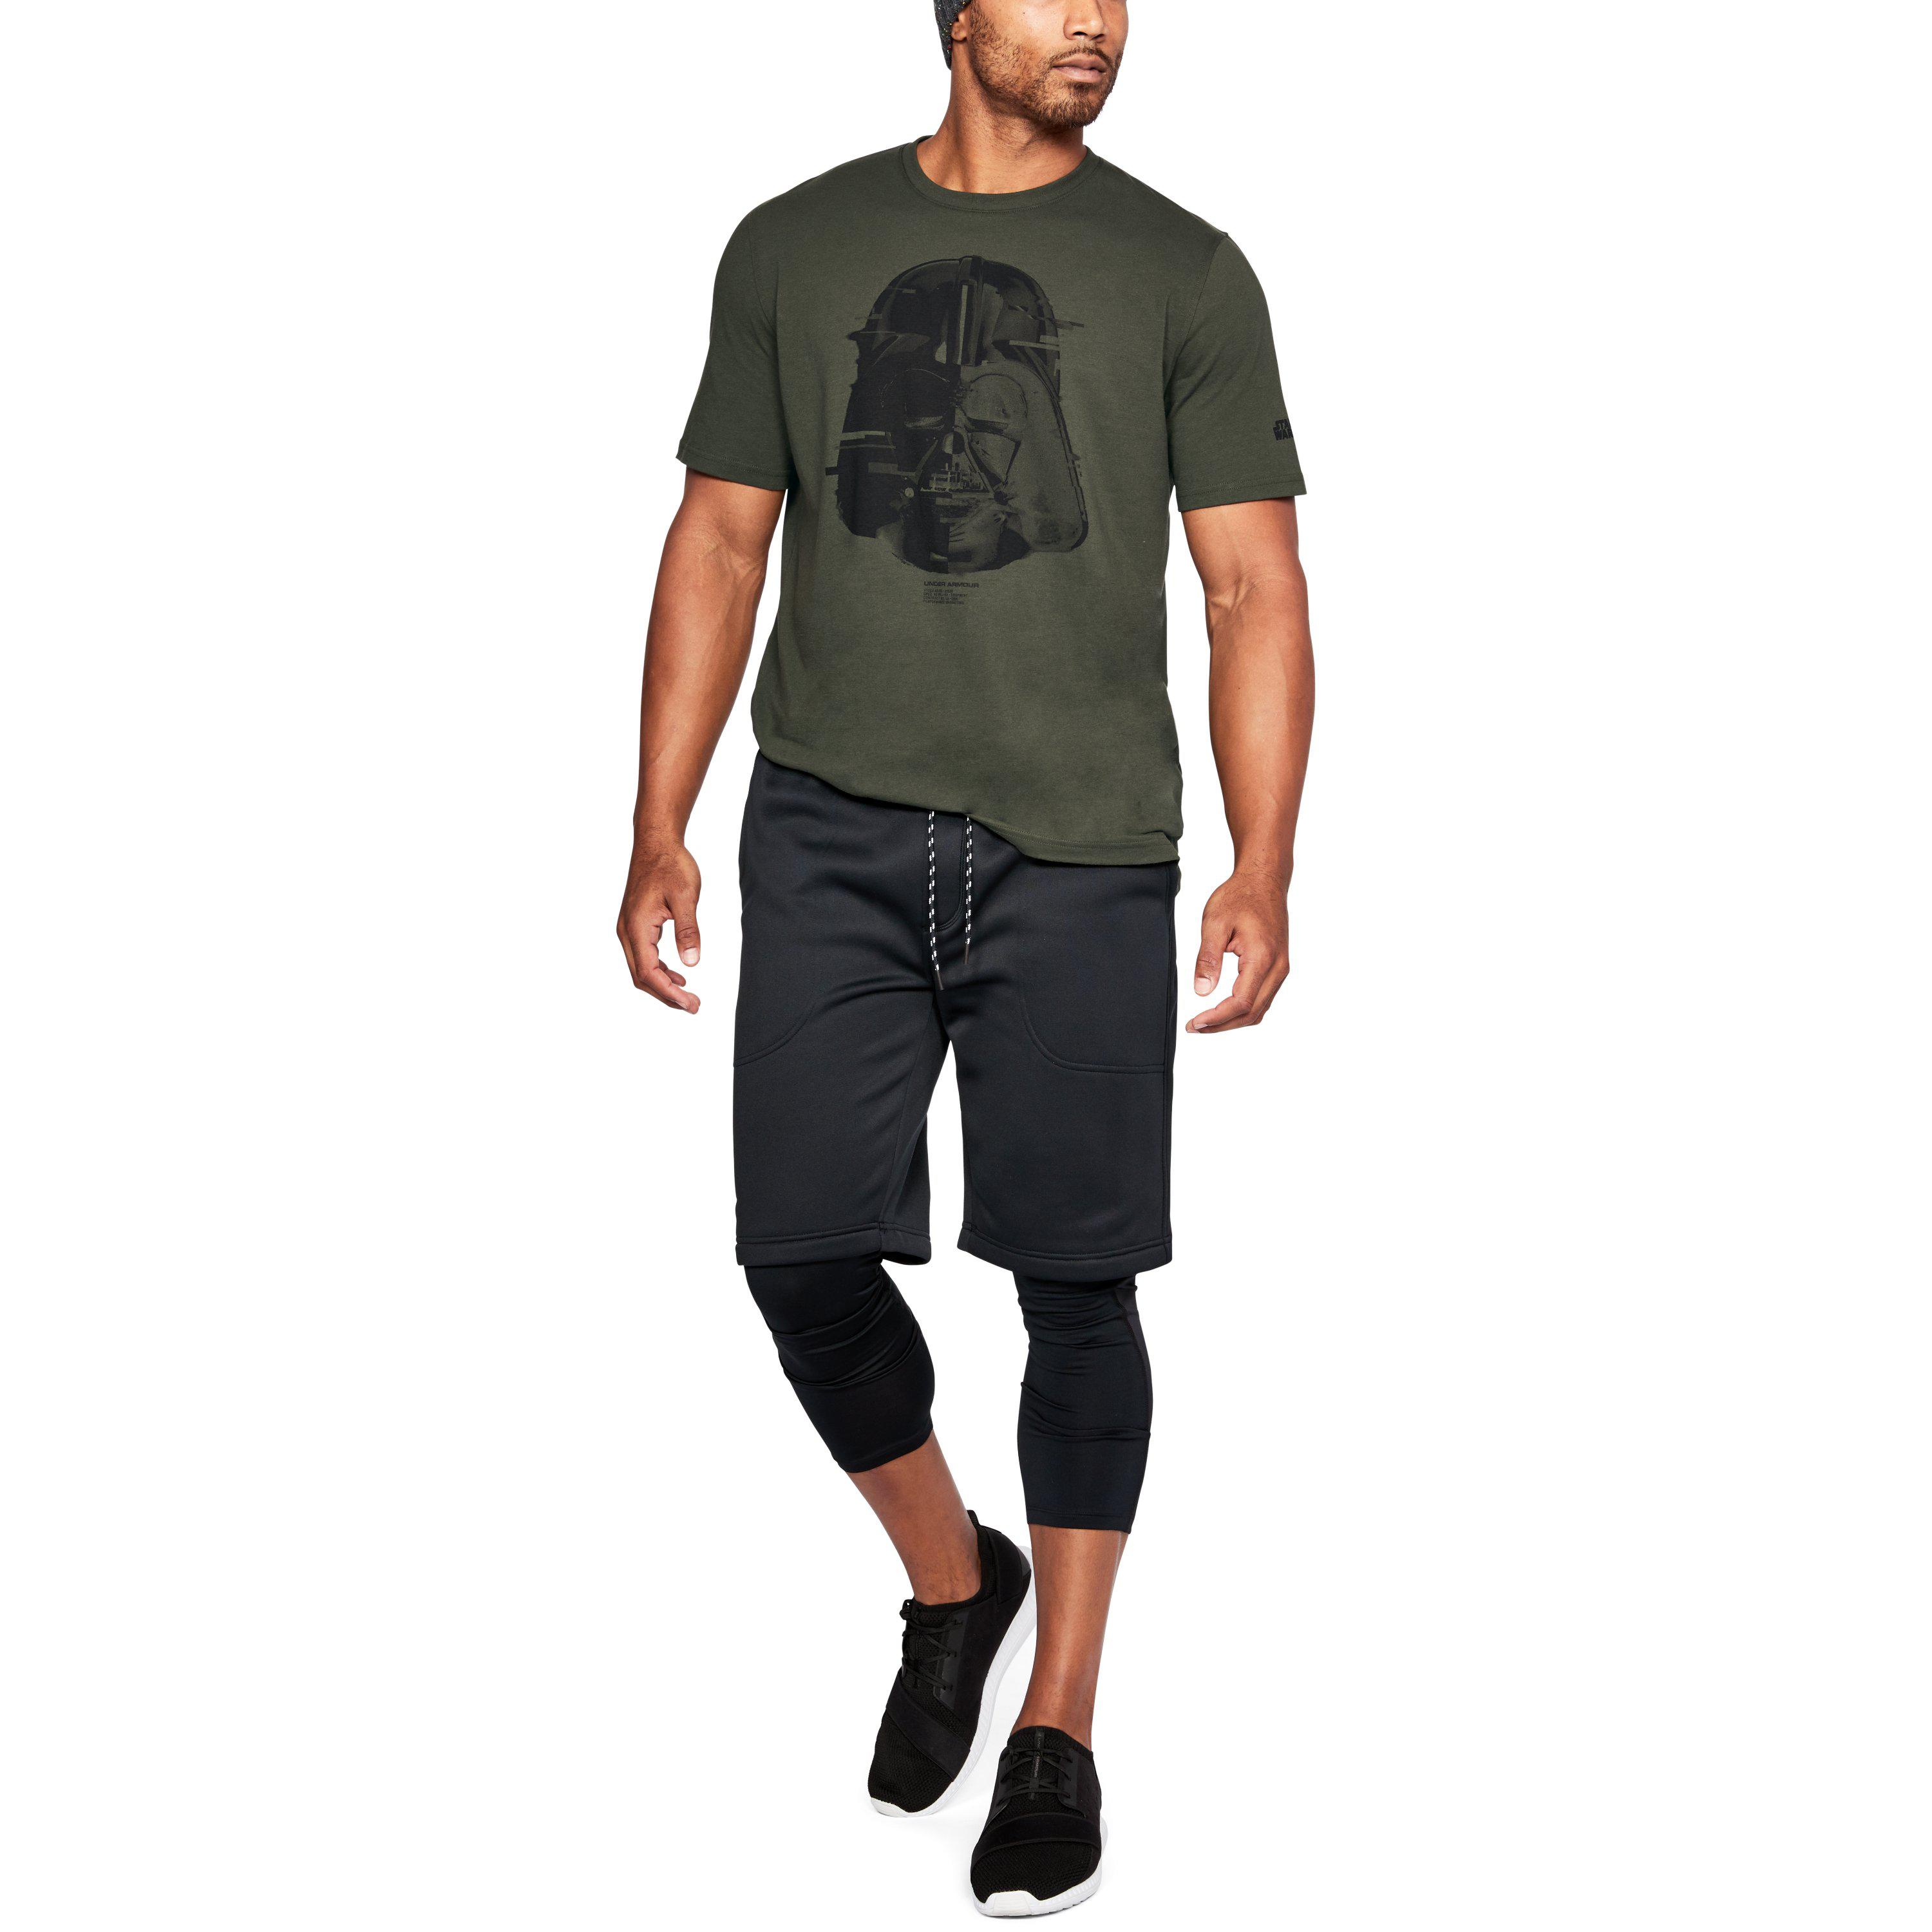 Under Armour Cotton Men's Ua Star Wars Vader T-shirt in Green for Men - Lyst